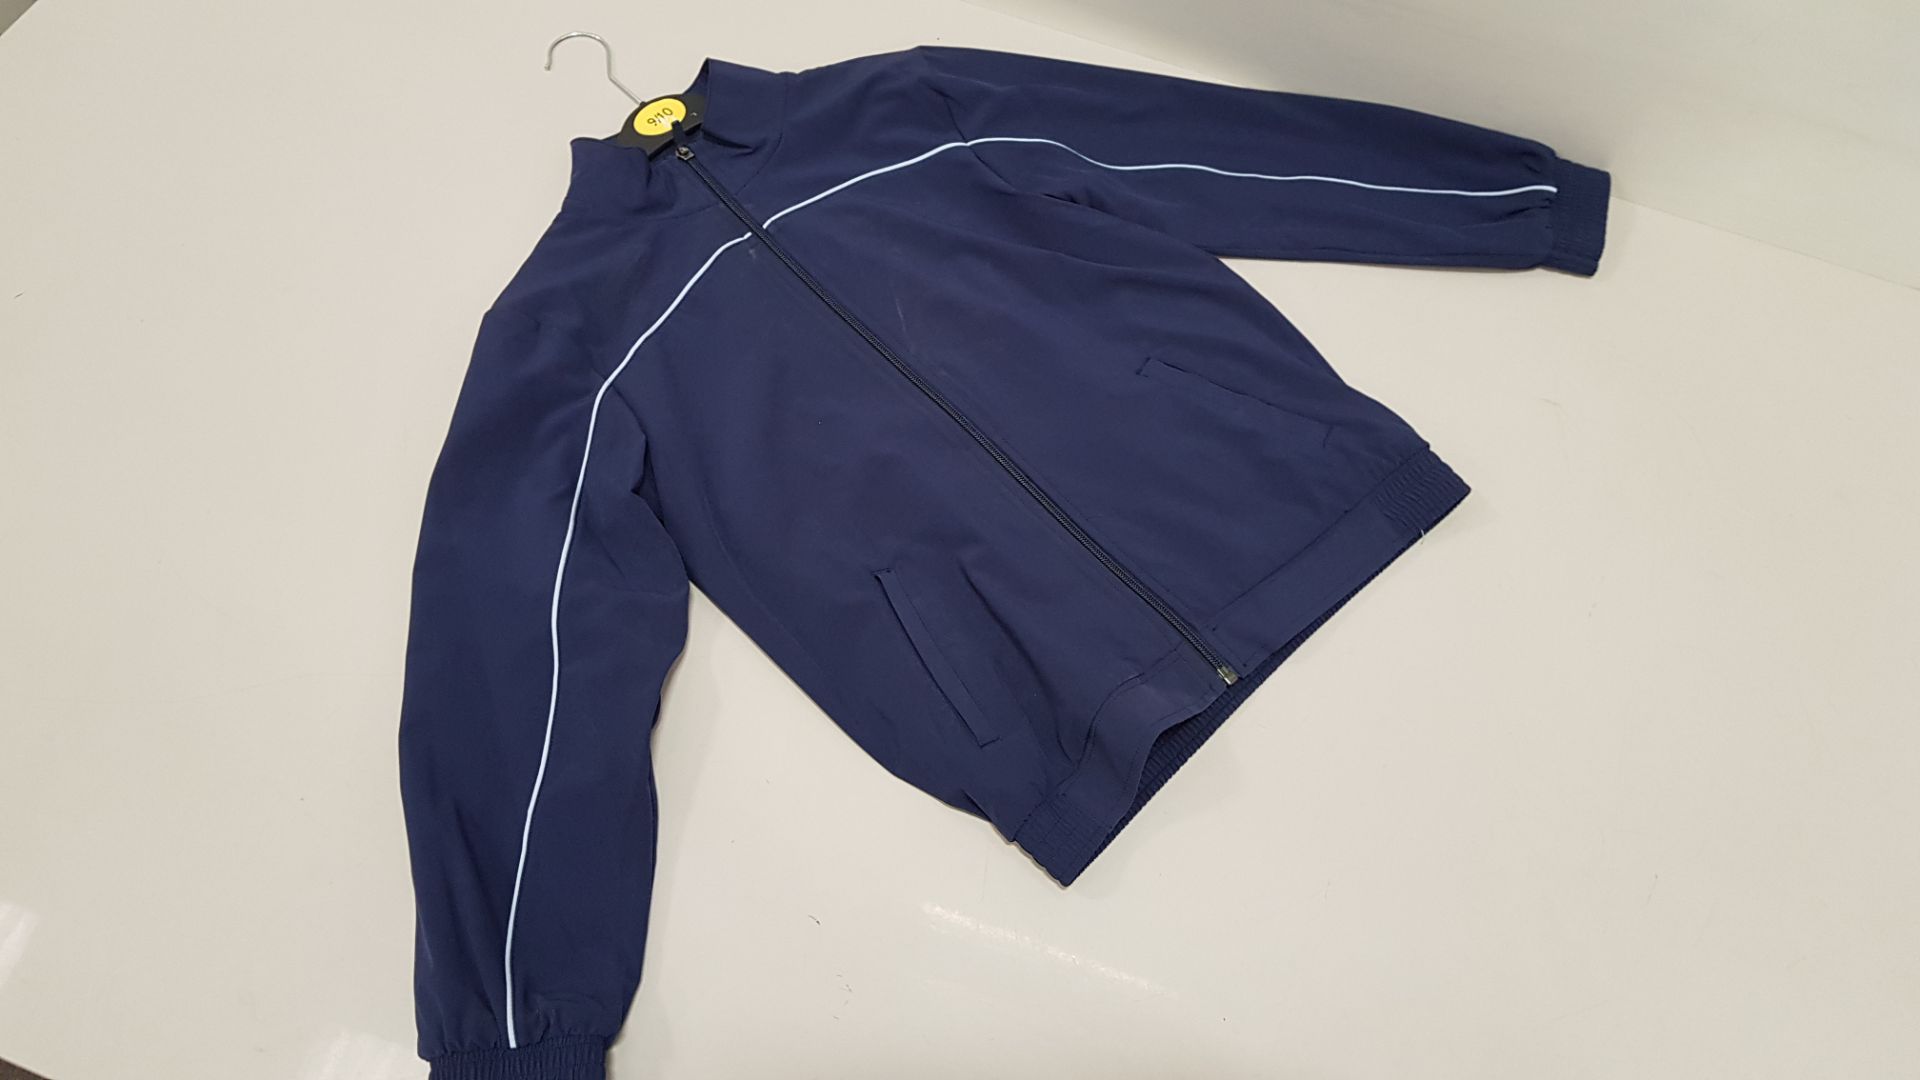 14 X BRAND NEW JOHN LEWIS NAVY PERFORMANCE TRACK TOPS AGE 11-12 RRP £20.00 (TOTAL RRP £280.00)